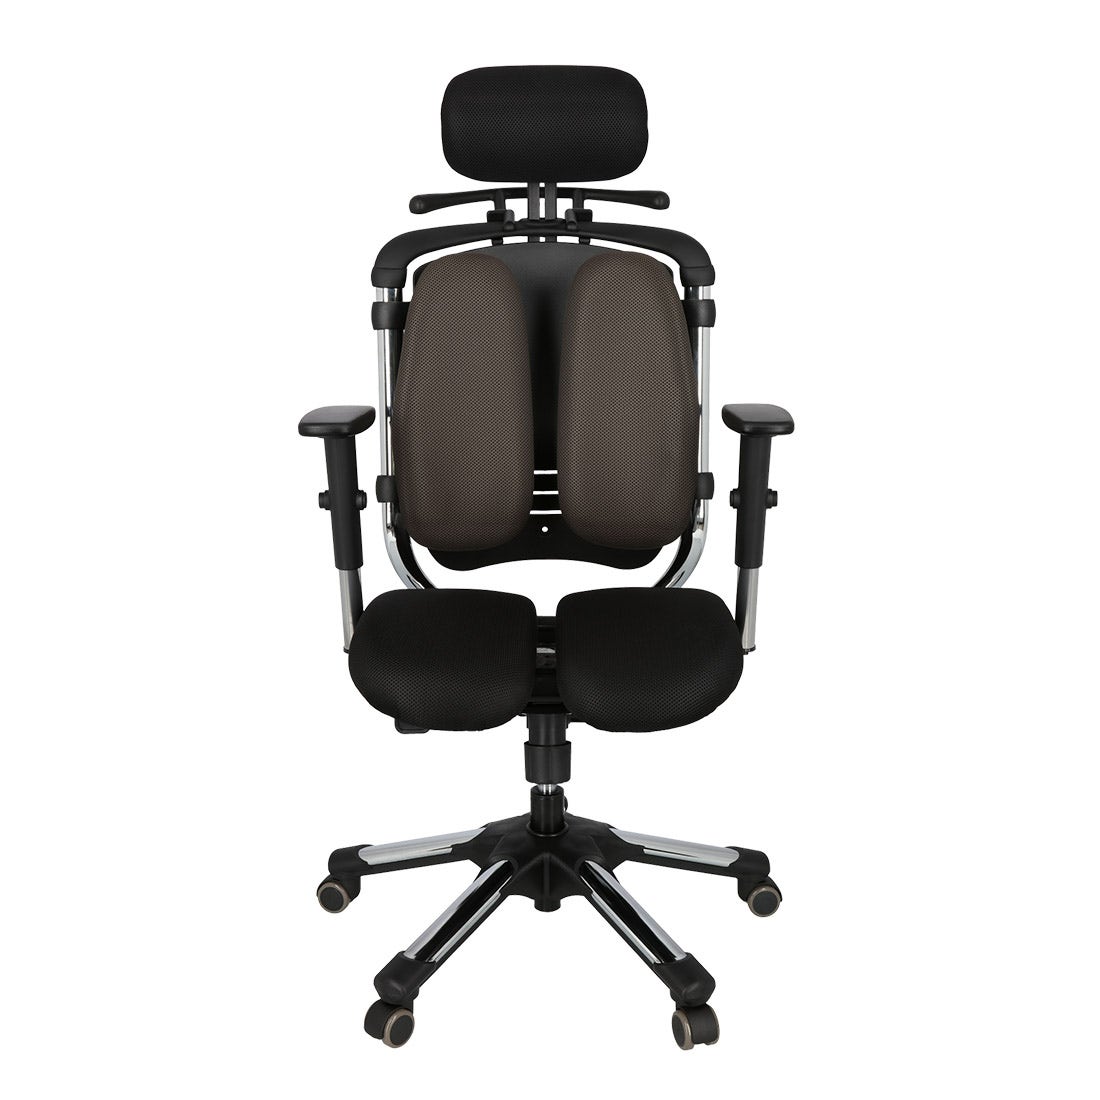 39014944-furniture-home-office-gaming-office-chair-01